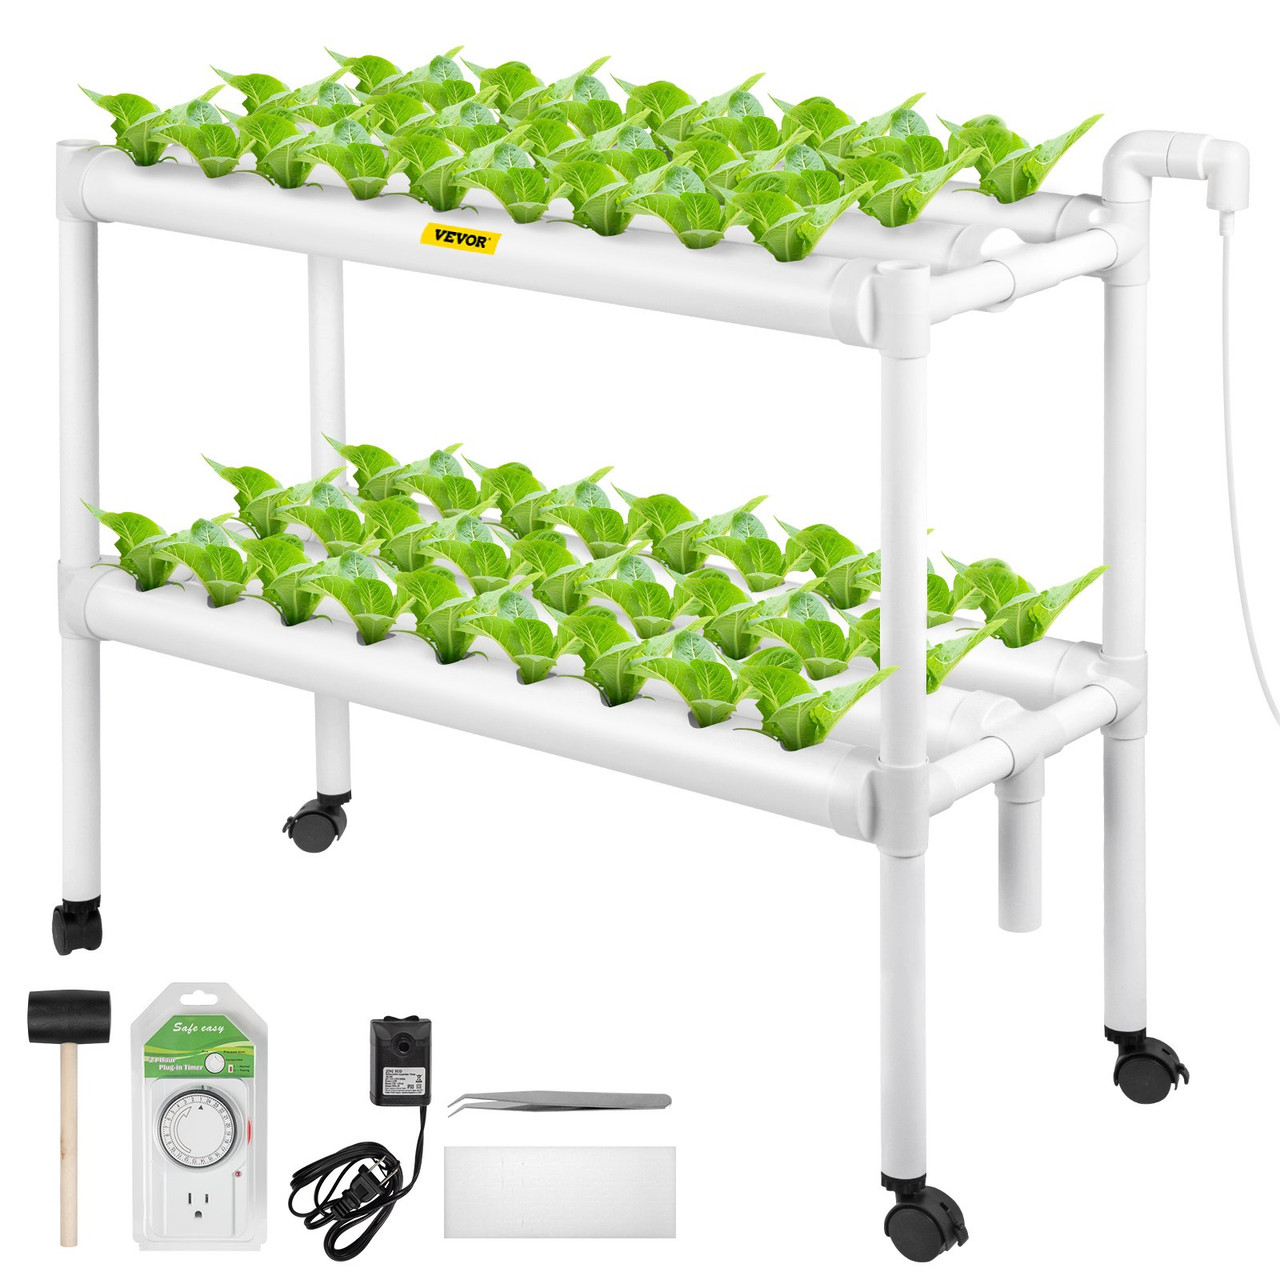 Hydroponics Growing System, 54 Sites 6 Food-Grade PVC-U Pipes, 2 Layers Indoor Planting Kit with Water Pump, Timer, Nest Basket, Sponge for Fruits, Vegetables, Herb, White